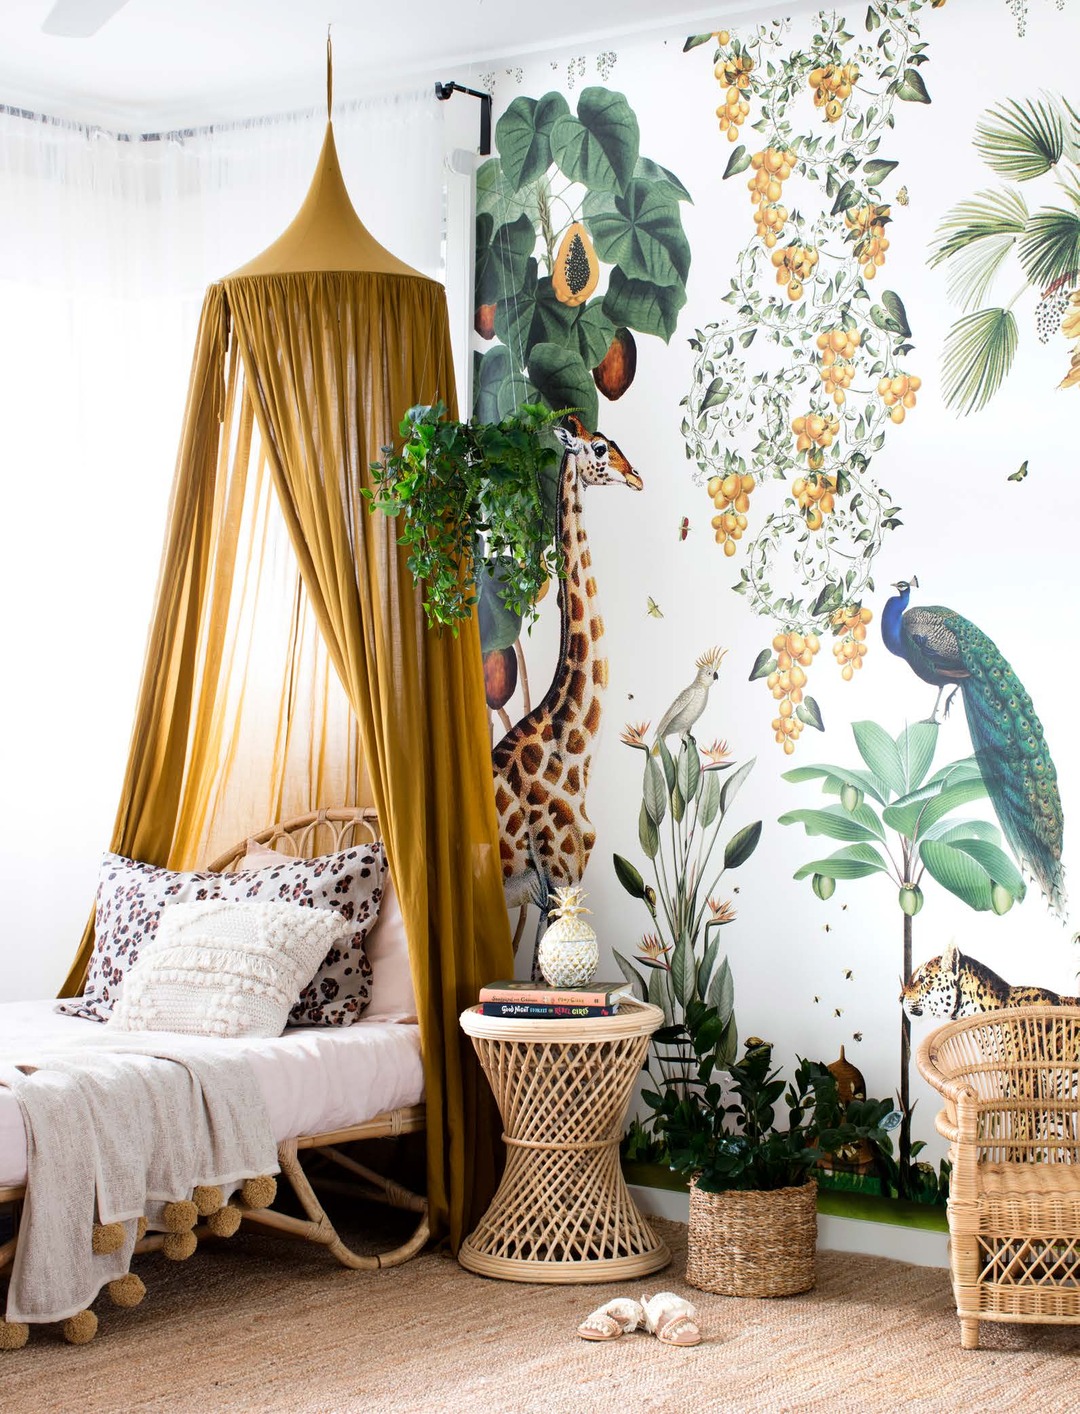 Annabelle's Room - a truely spectacular take on a jungle theme.